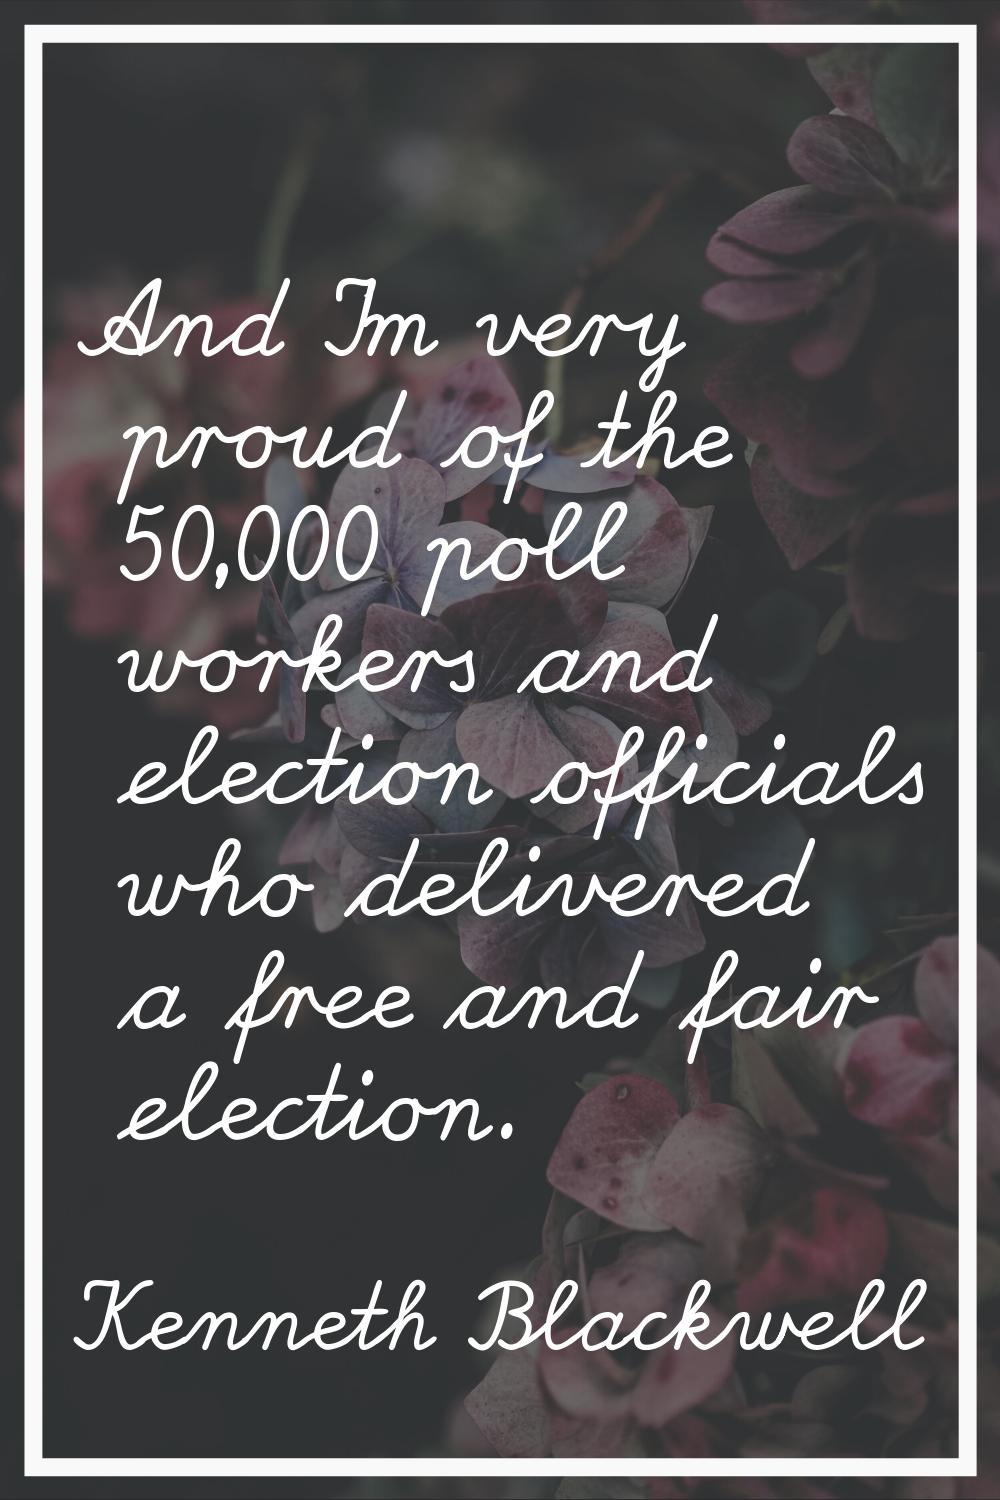 And I'm very proud of the 50,000 poll workers and election officials who delivered a free and fair 